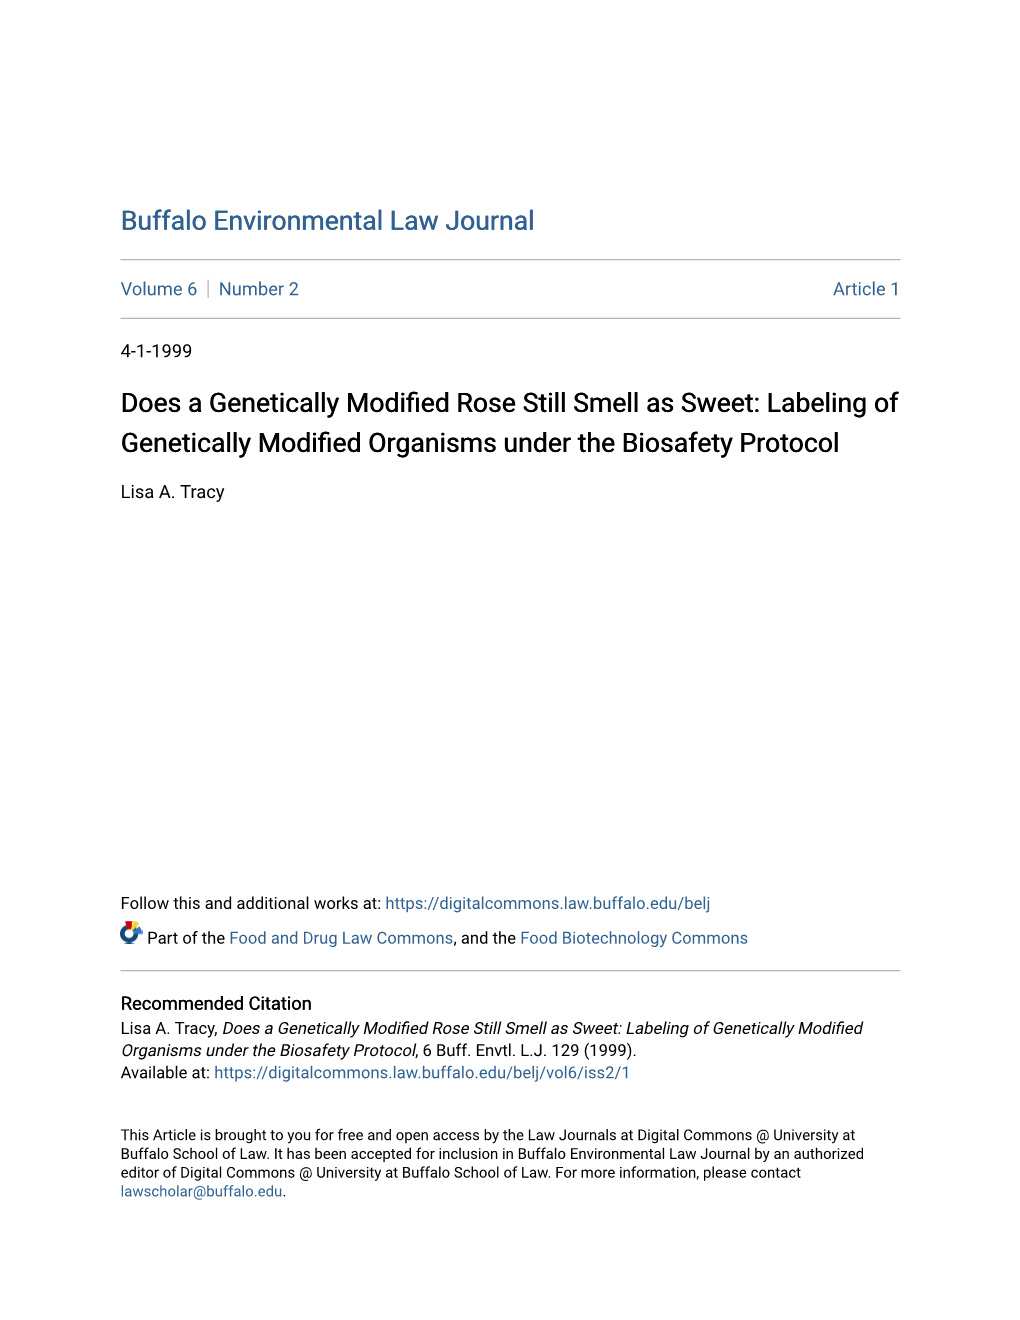 Labeling of Genetically Modified Organisms Under the Biosafety Protocol